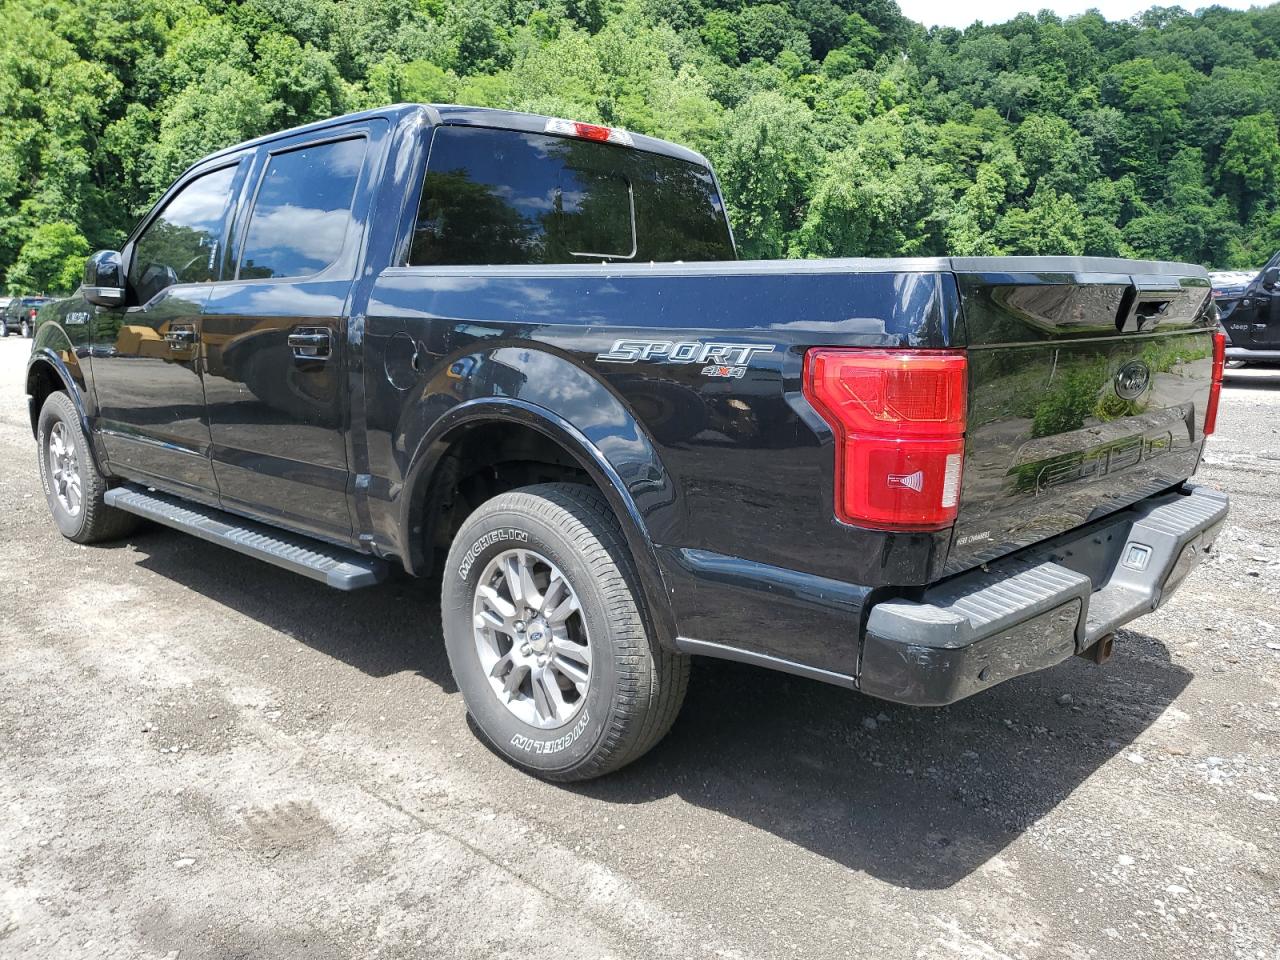 Salvage 2018 Ford F150 